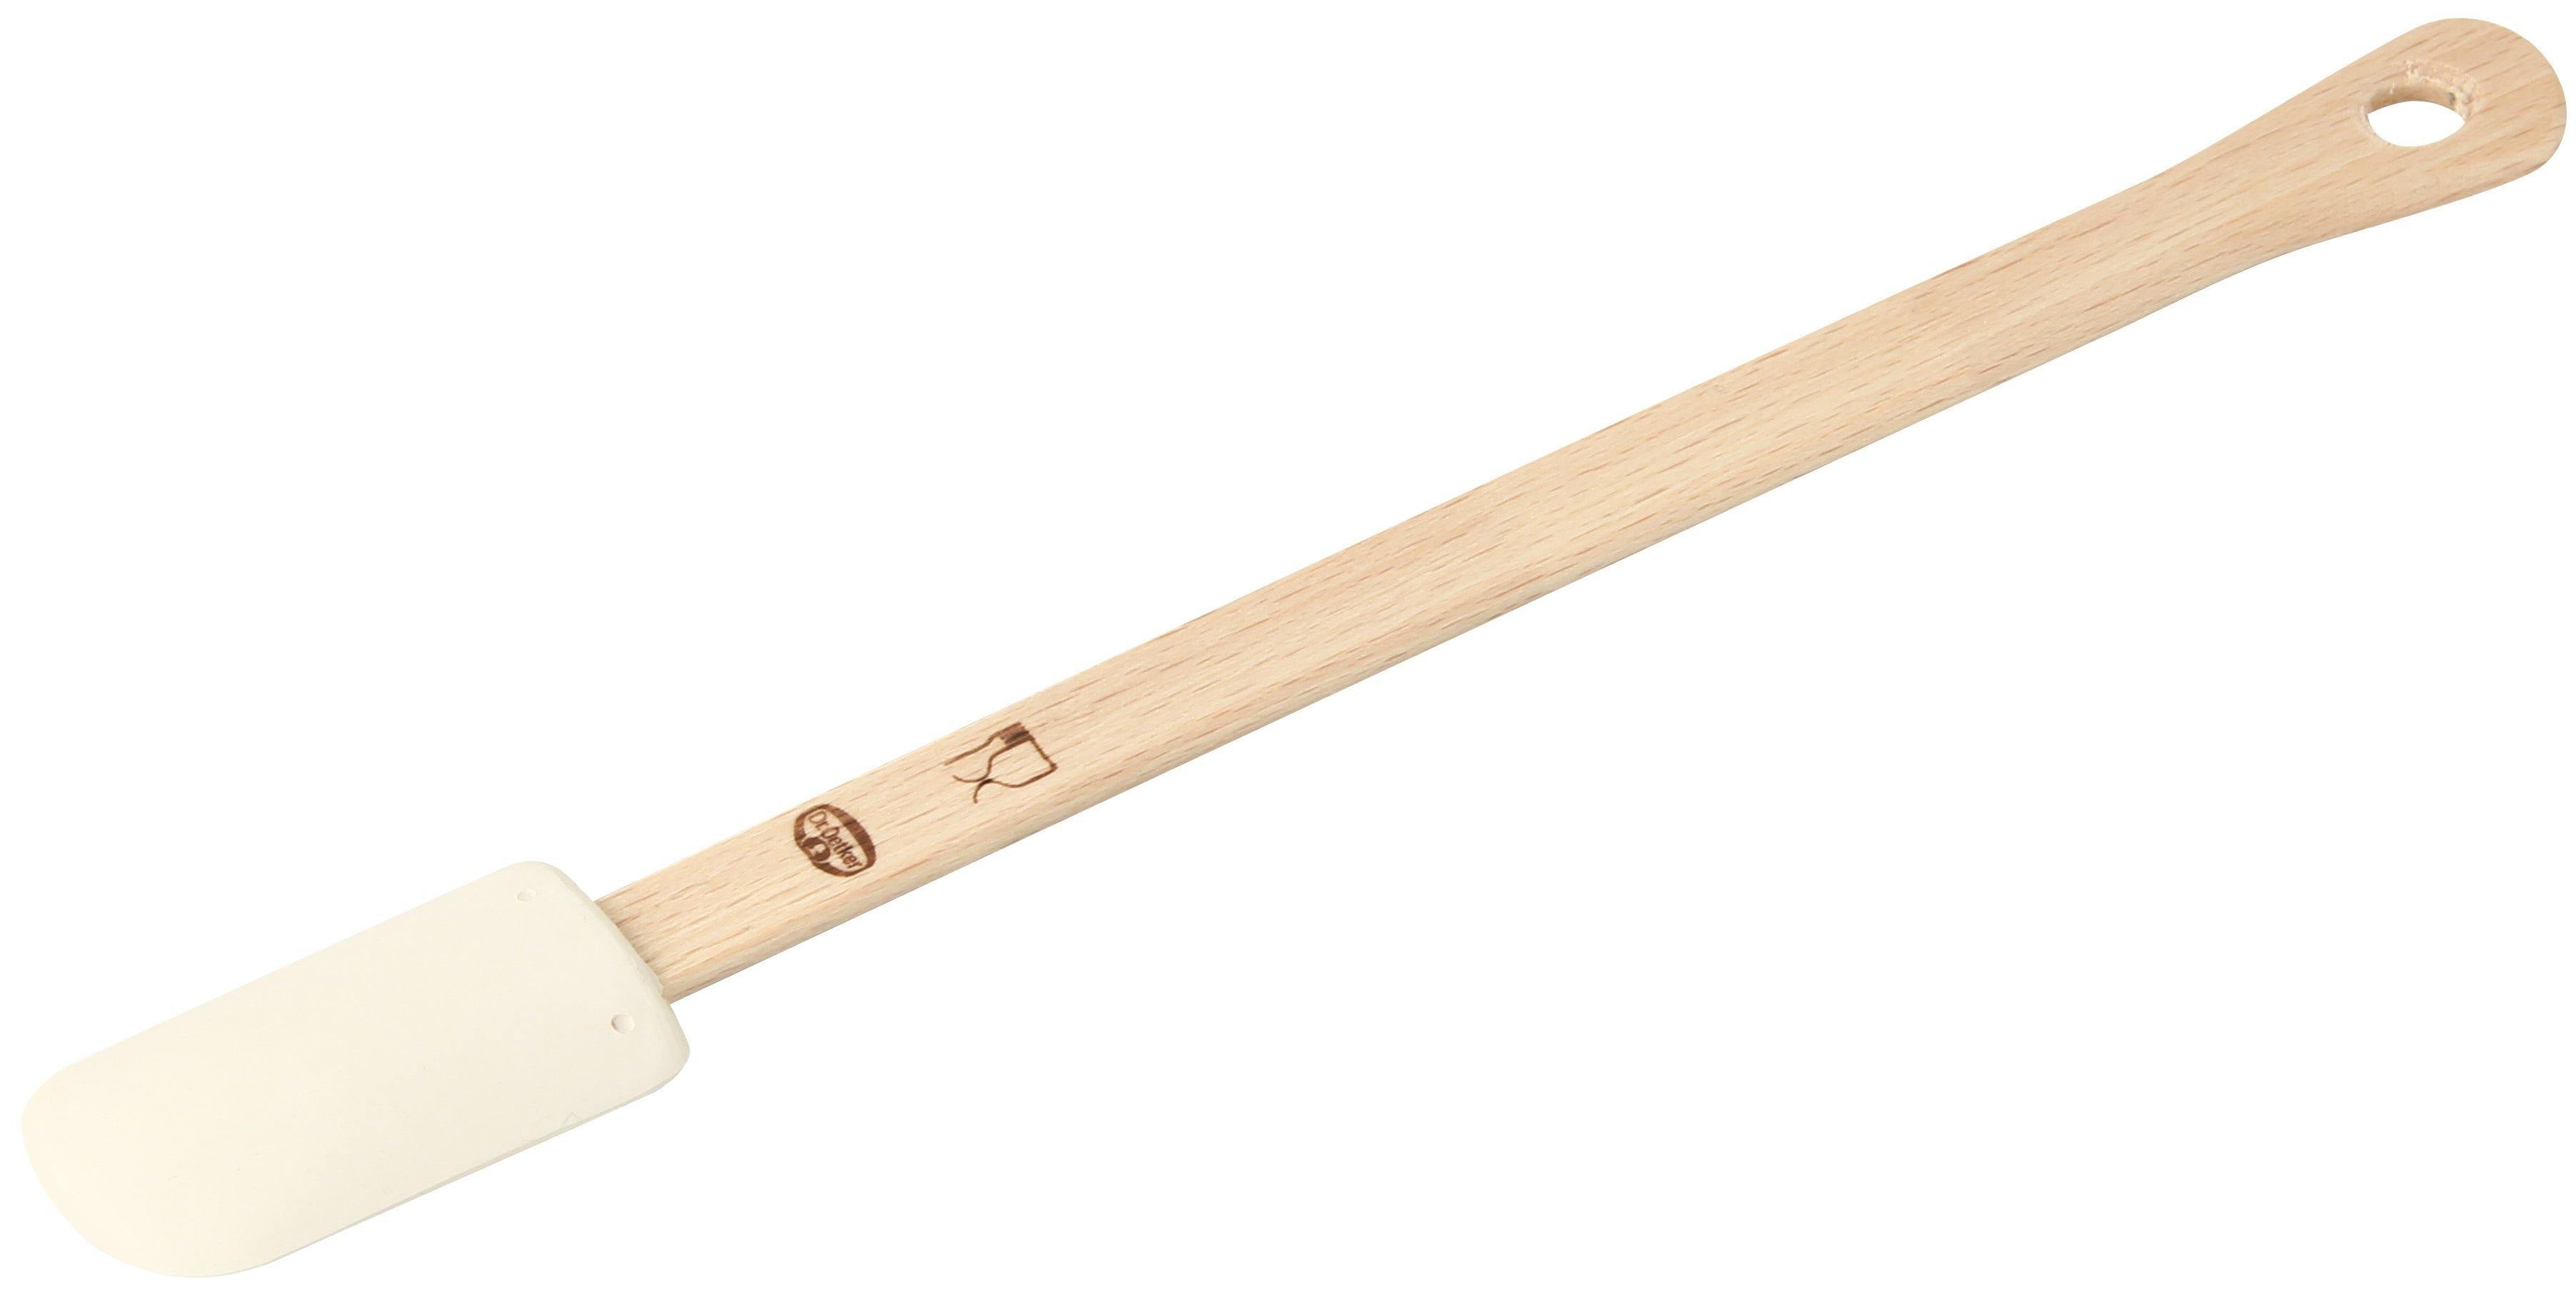 Dr. Oetker Dough Scraper With Wooden Handle, White, 25X2.8 Cm - Whole and All